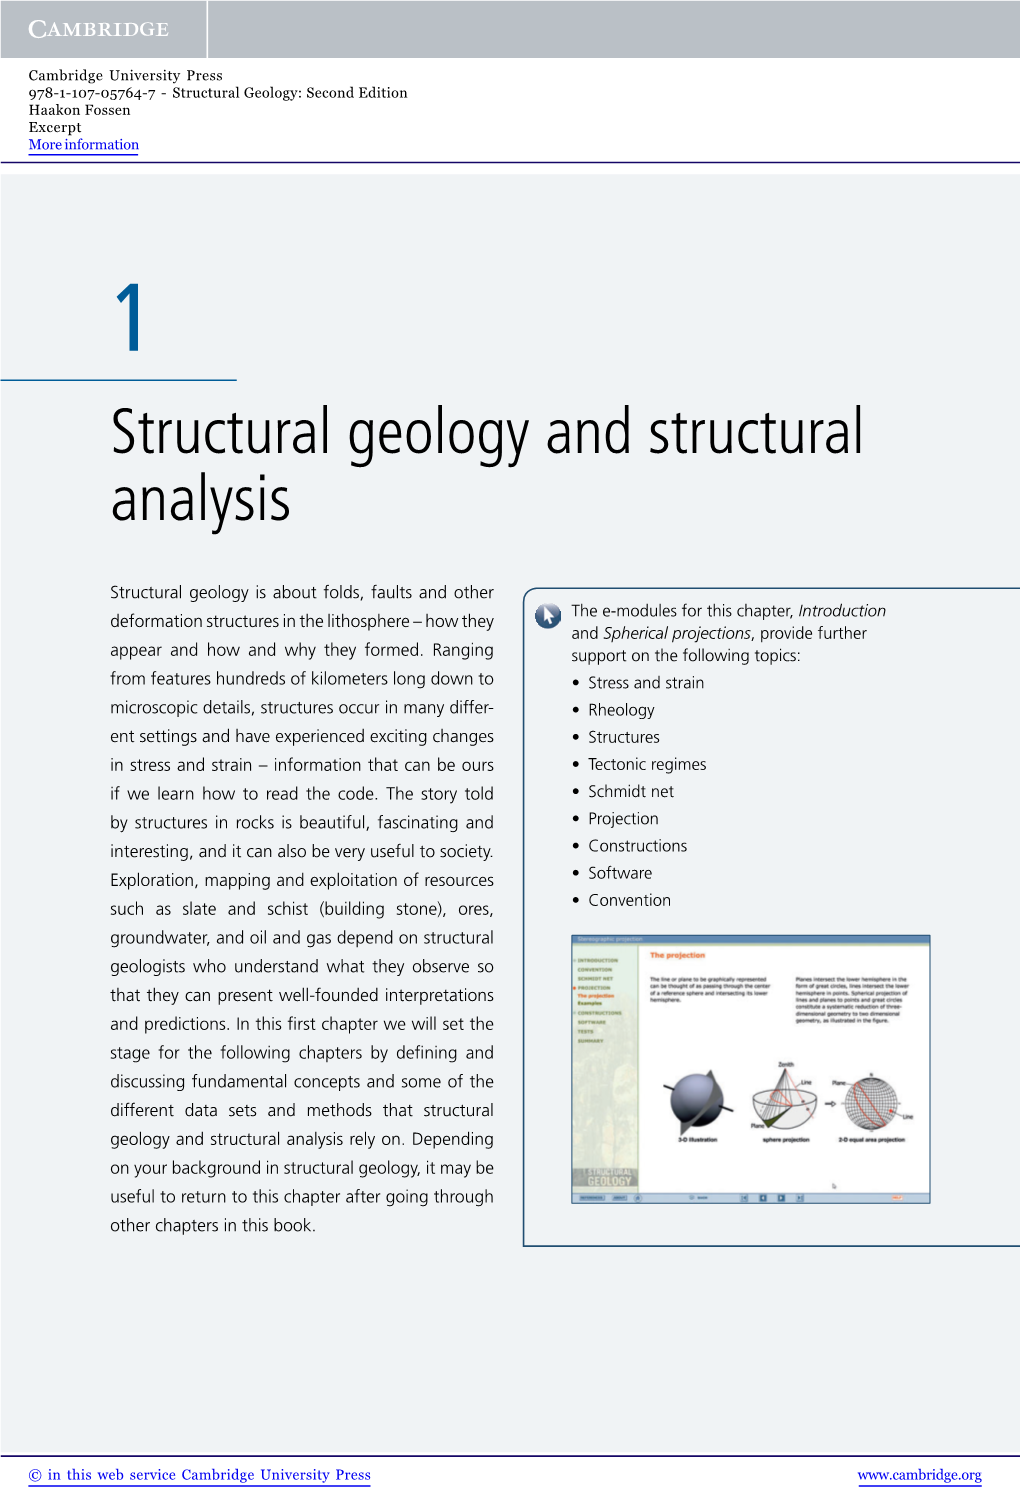 Structural Geology and Structural Analysis